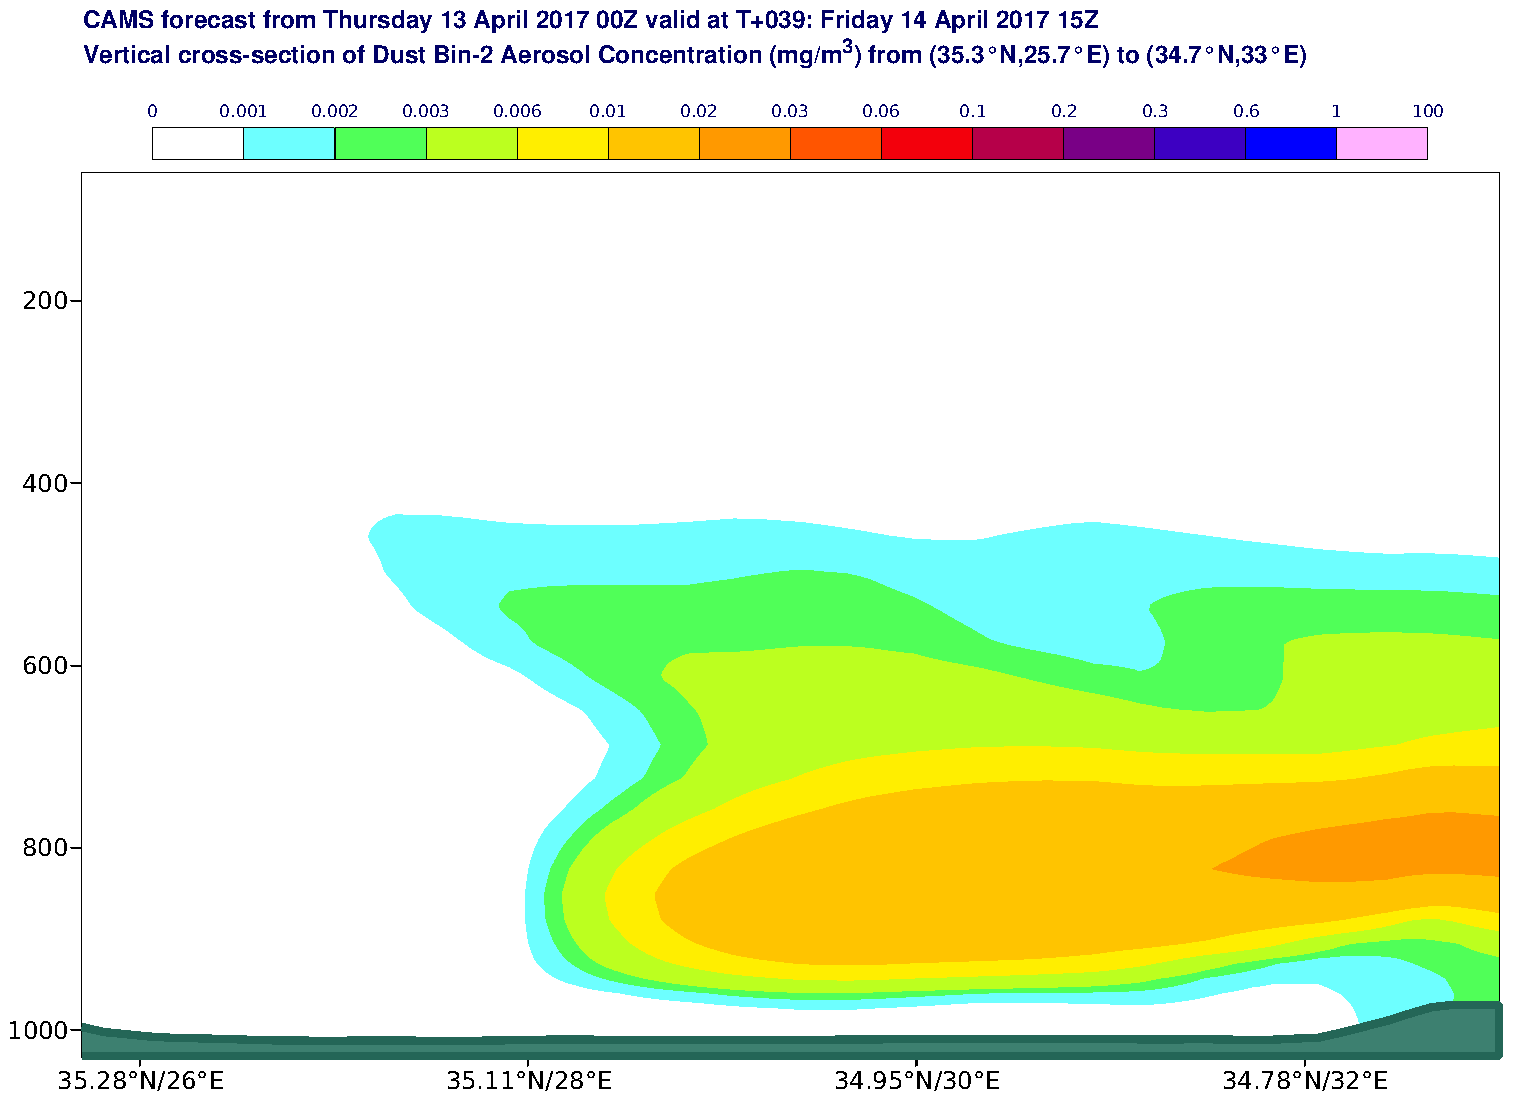 Vertical cross-section of Dust Bin-2 Aerosol Concentration (mg/m3) valid at T39 - 2017-04-14 15:00